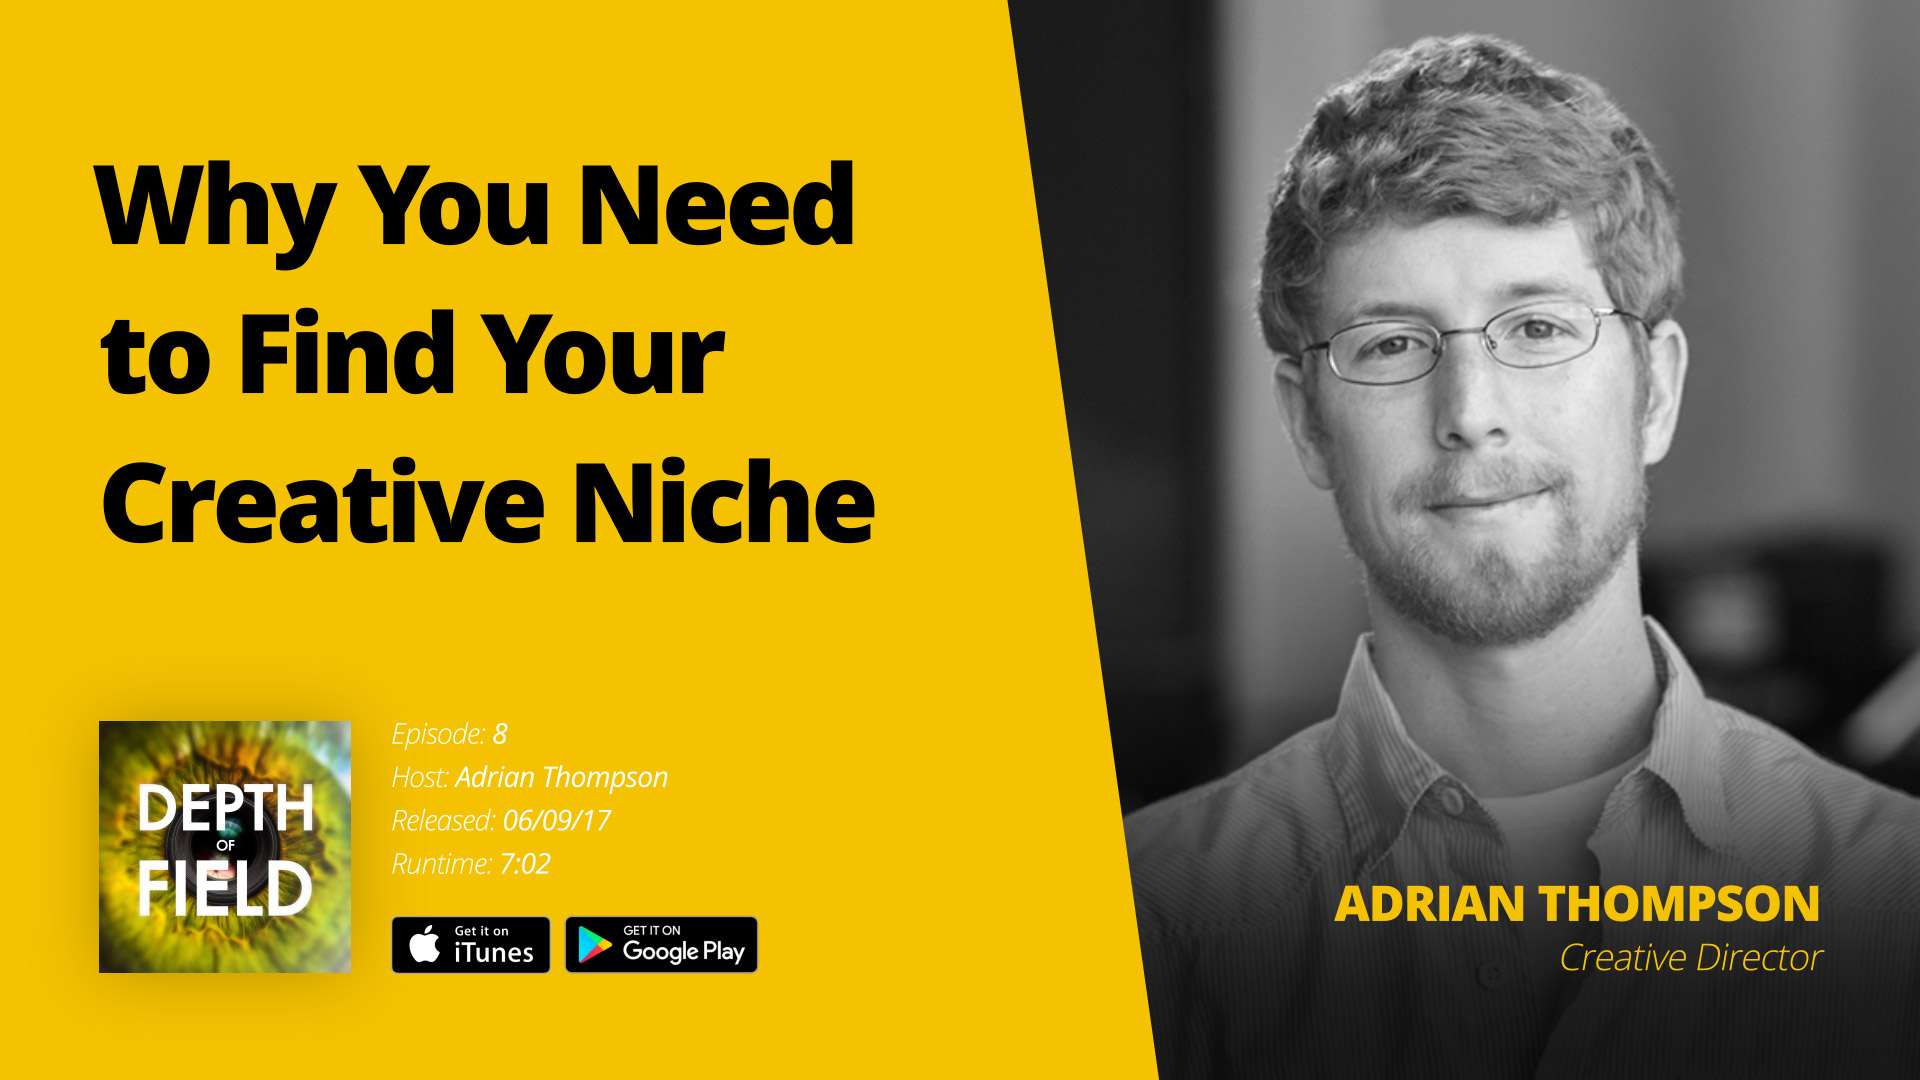 Why You Need to Get Specific & Find Your Creative Niche